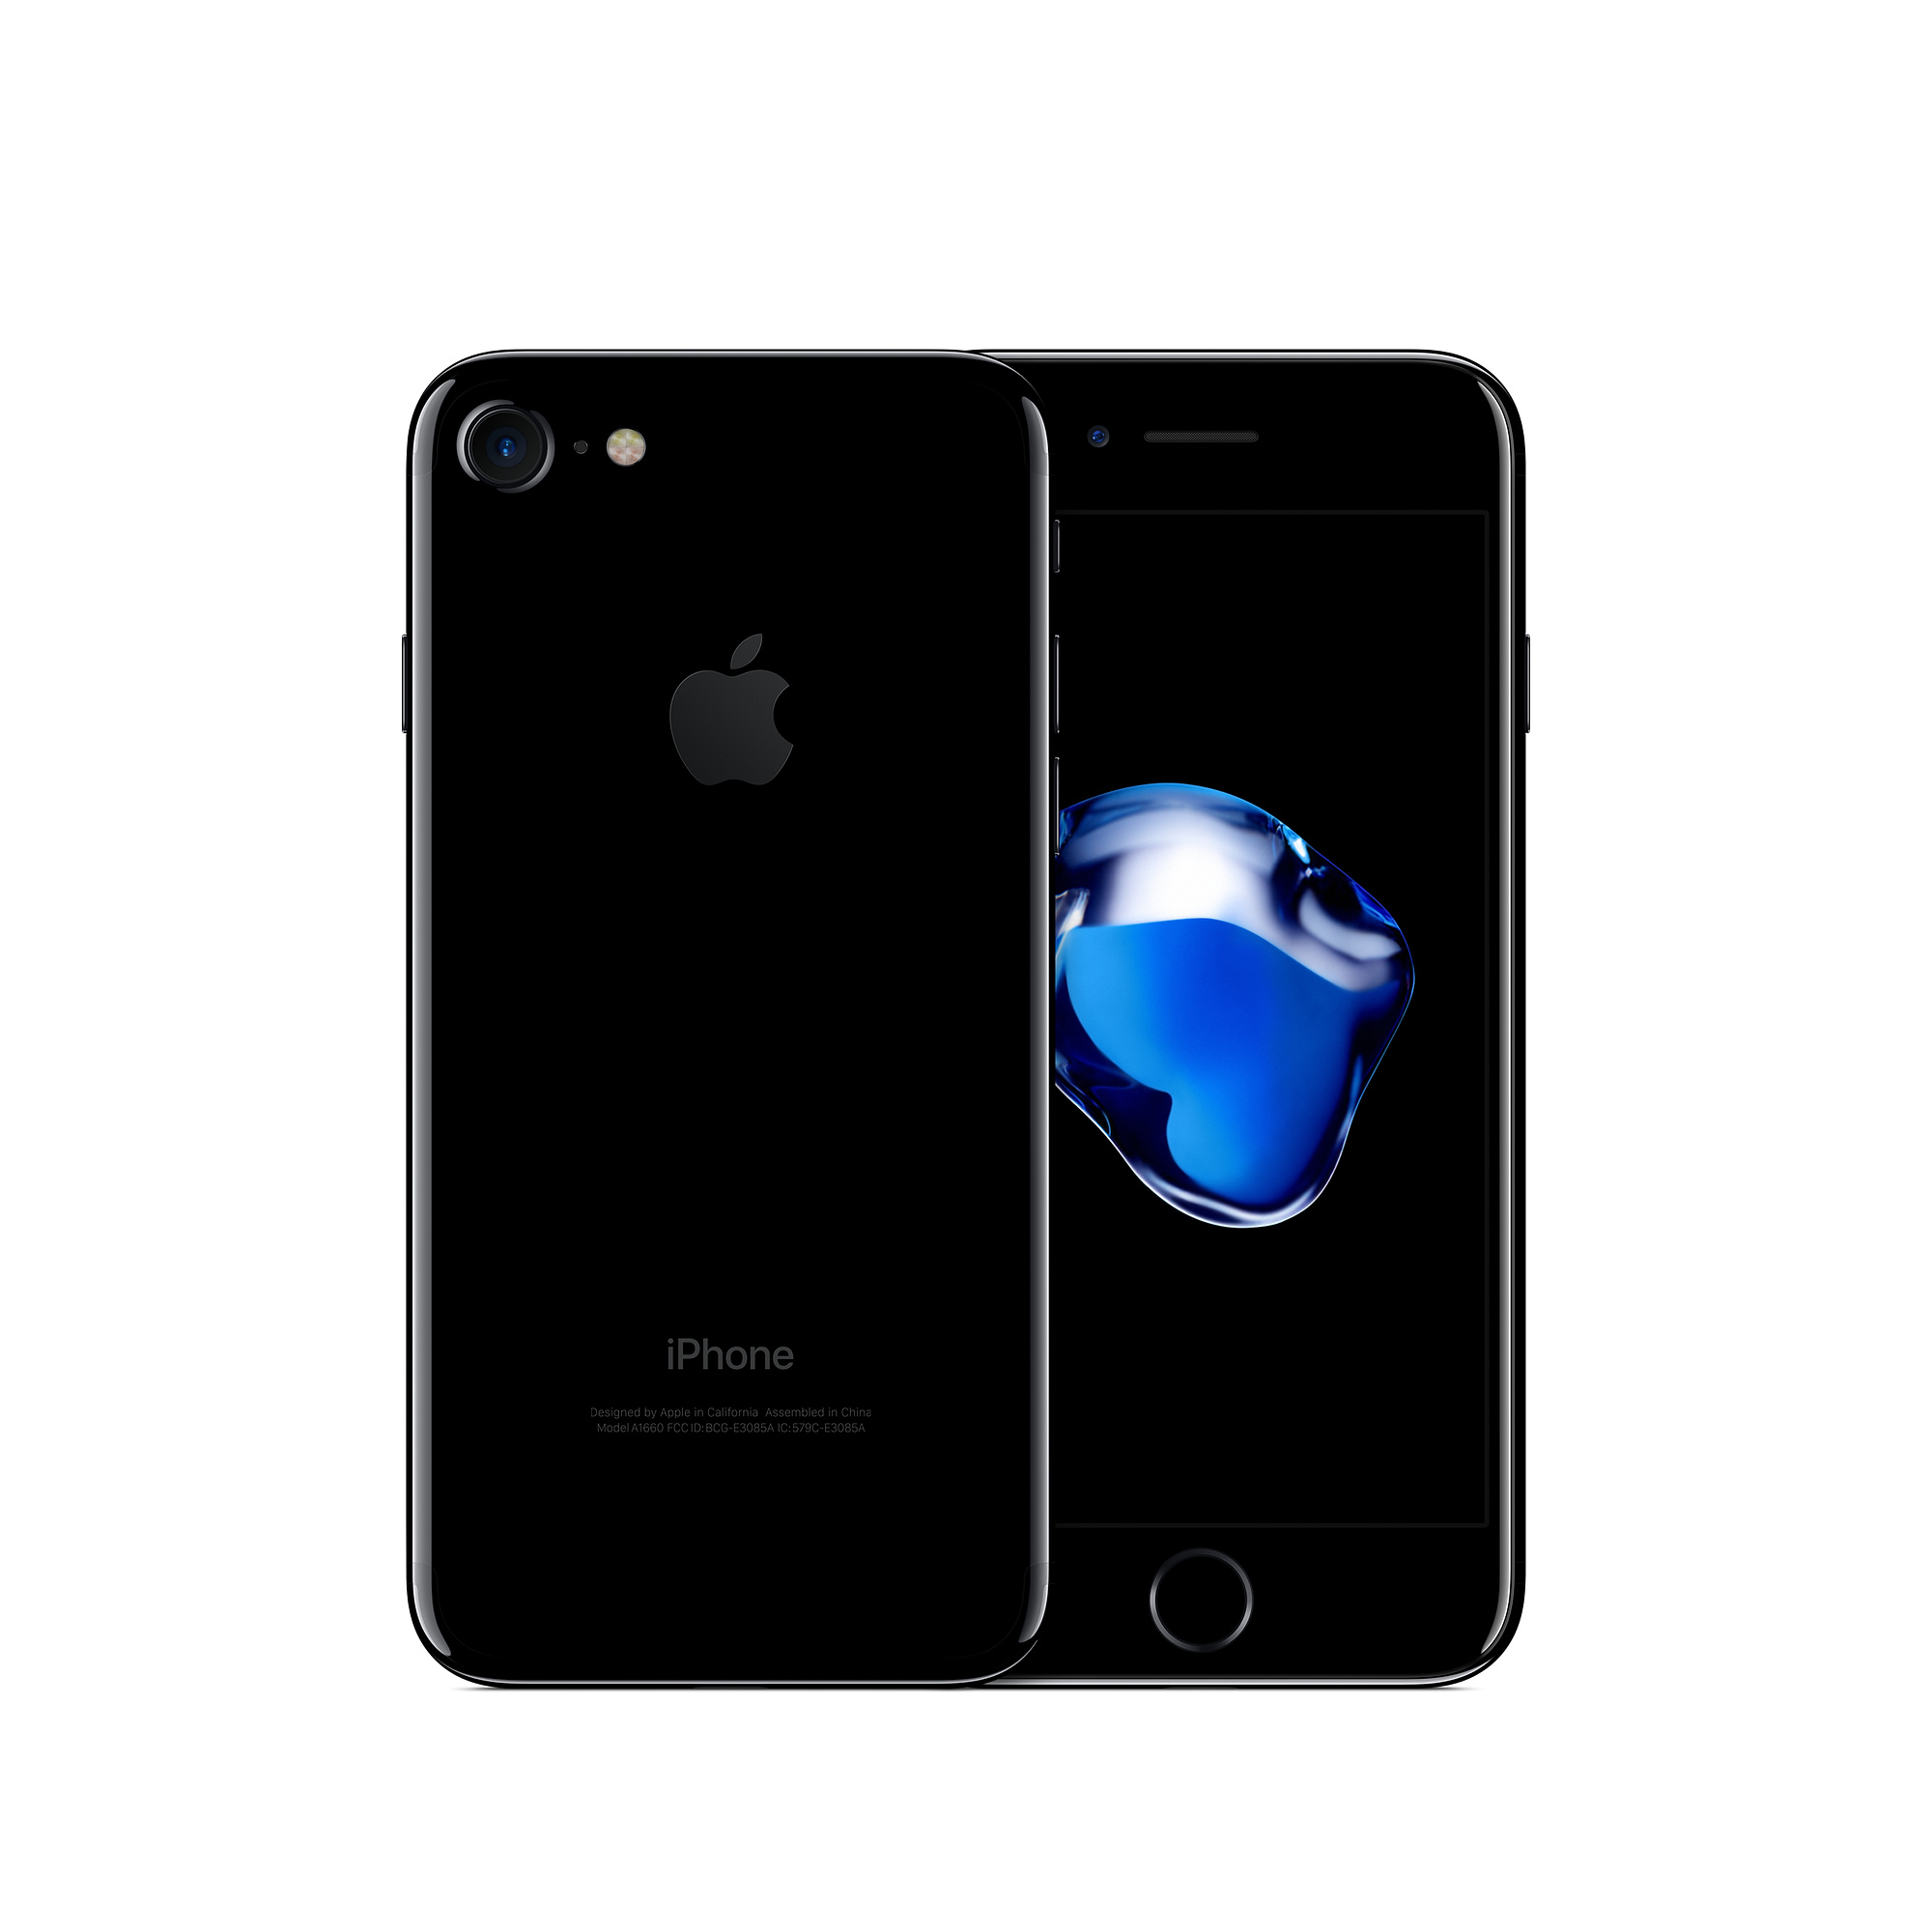 Apple iPhone 7 with FaceTime - 128GB, 4G LTE, Jet Black